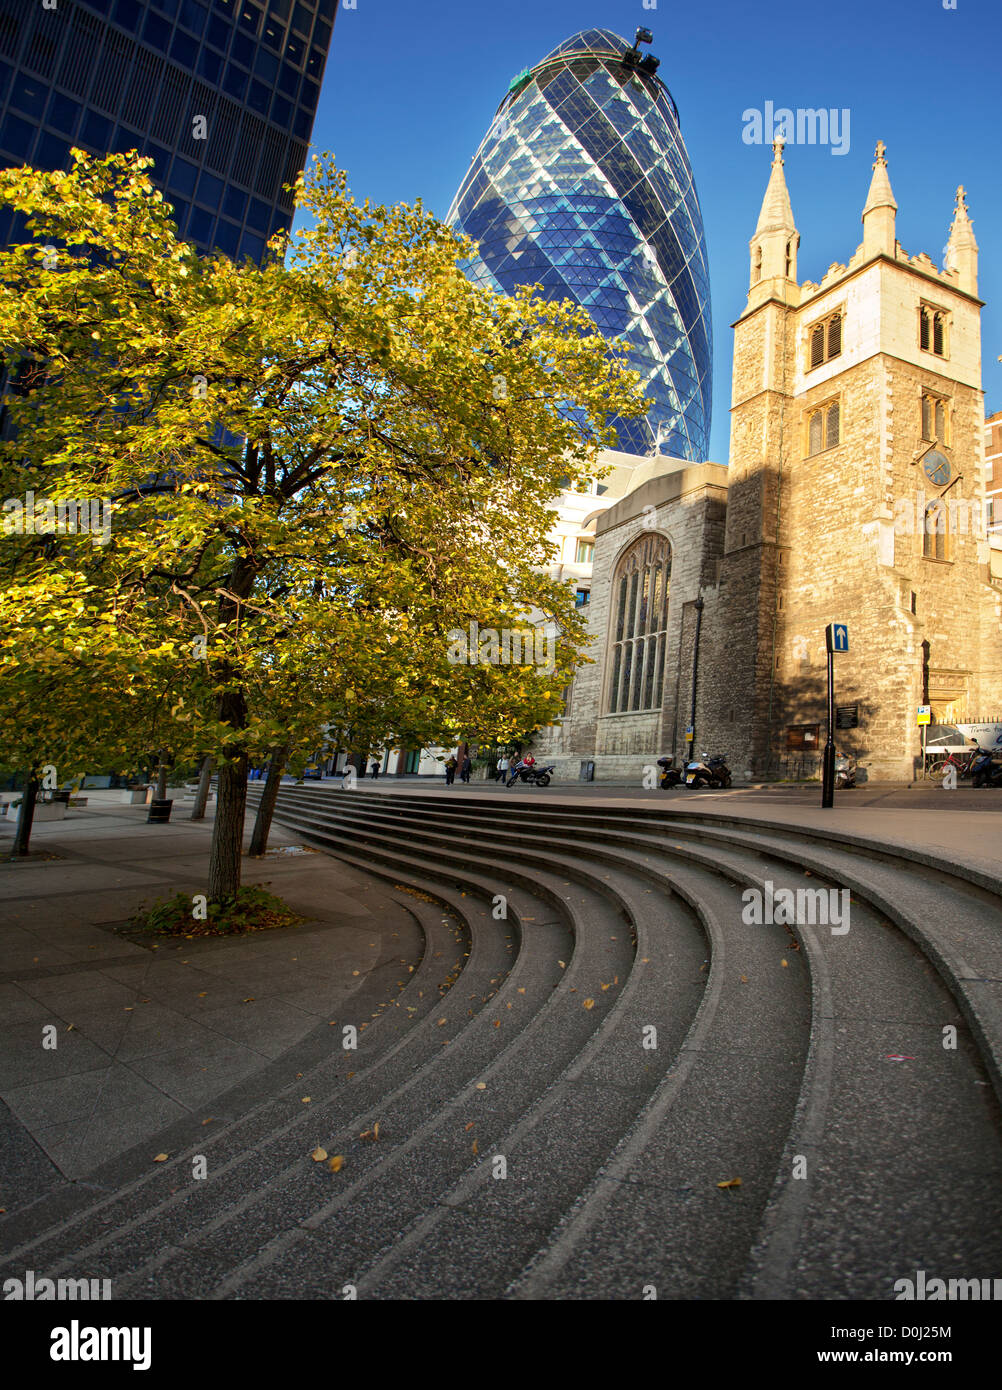 A view of the Swiss Re tower and St Andrew Undershaft church beneath it. Stock Photo